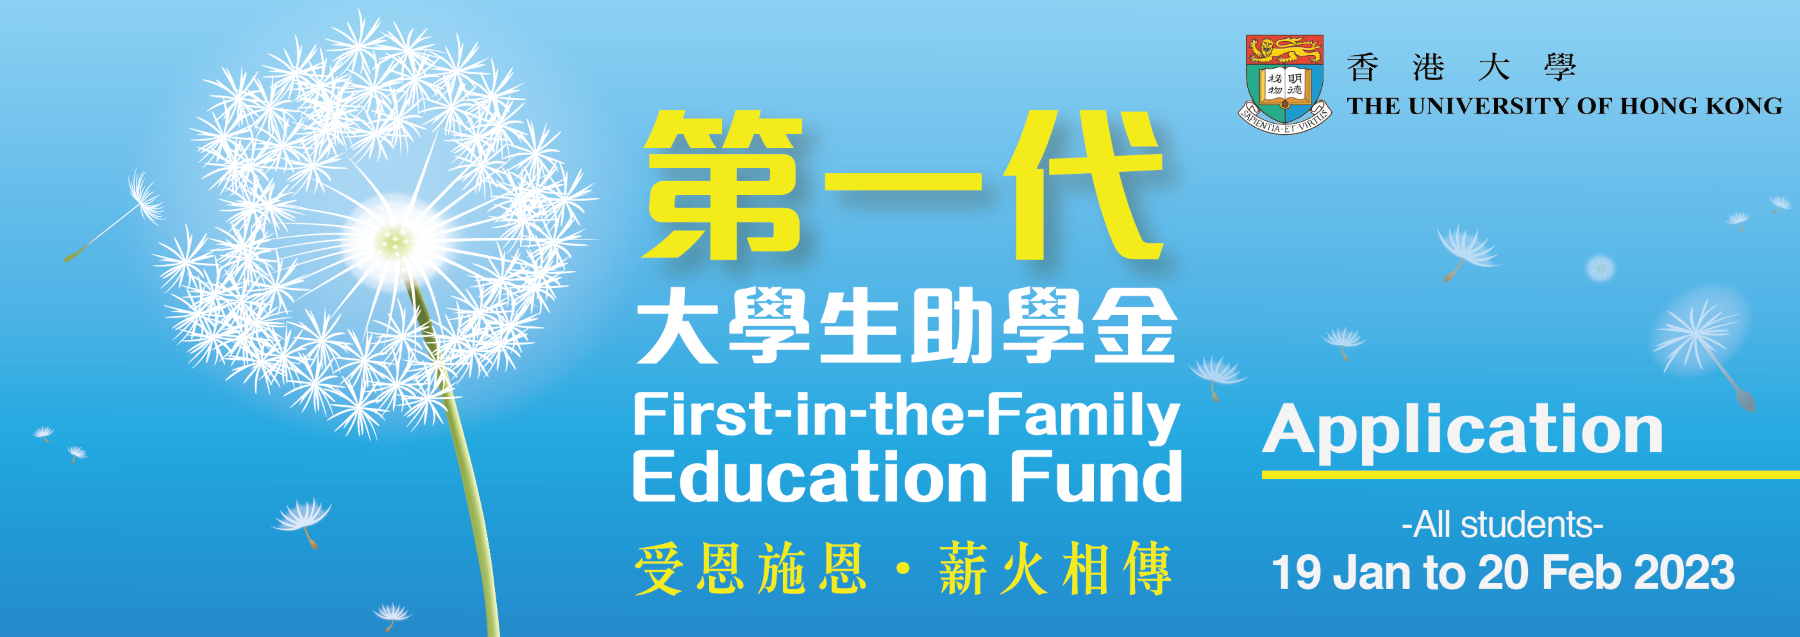 First-in-the-Family Education Fund (Round II) Application